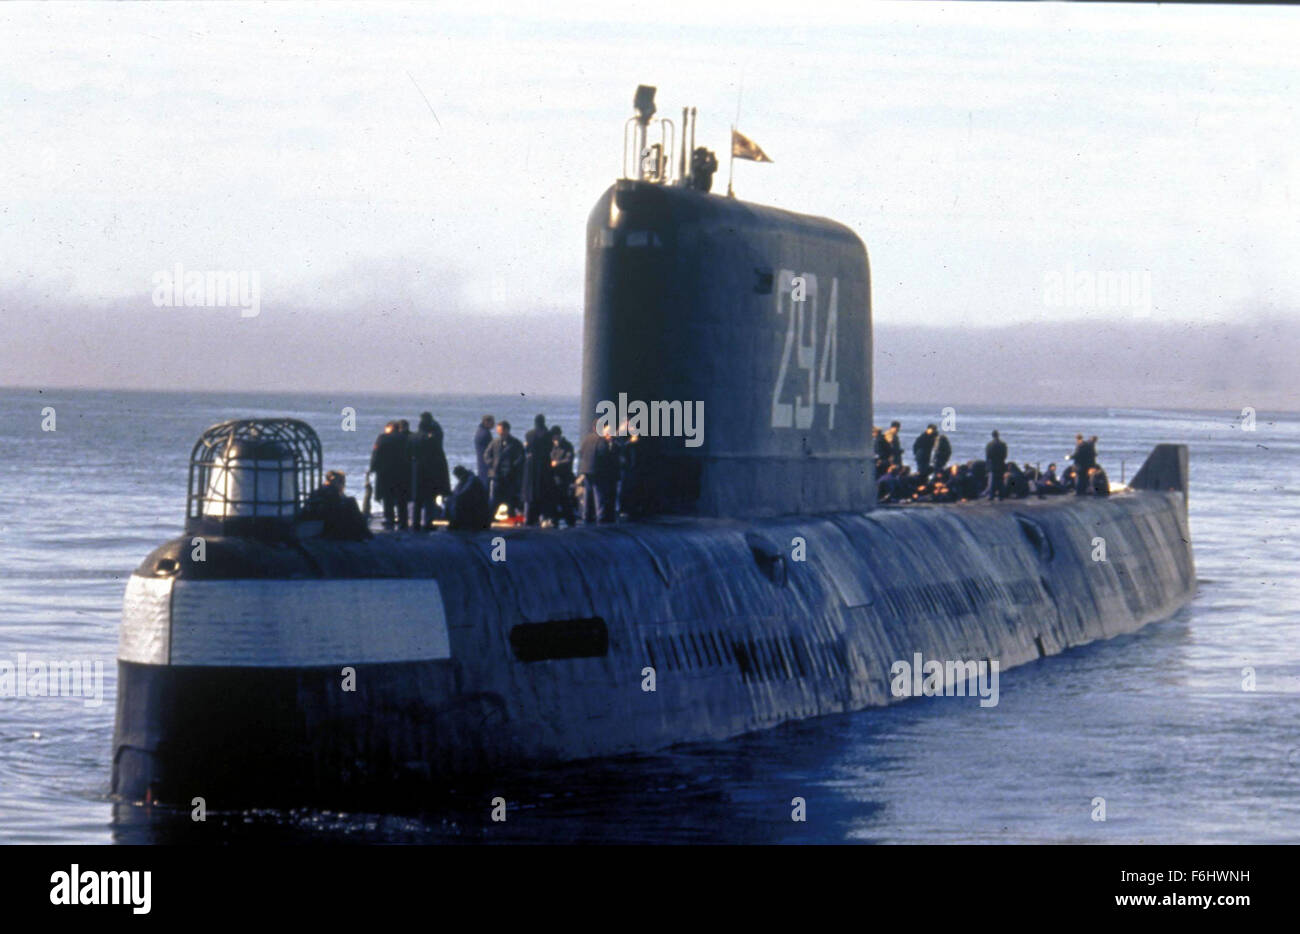 Jul 25, 2002; Hollywood, CA, USA; Actor Harrison Ford stars in this true story of Russia's first nuclear ballistic submarine, which suffered a malfunction in its nuclear reactor on its maiden voyage in the North Atlantic in 1961. The submarine's crew, led by the unyielding Captain Zateyev, races against time to prevent a Chernobyl-like nuclear explosion which threatens not only the lives of his crew, but has the potential to ignite a world war between the super powers..  (Credit Image: ) Stock Photo